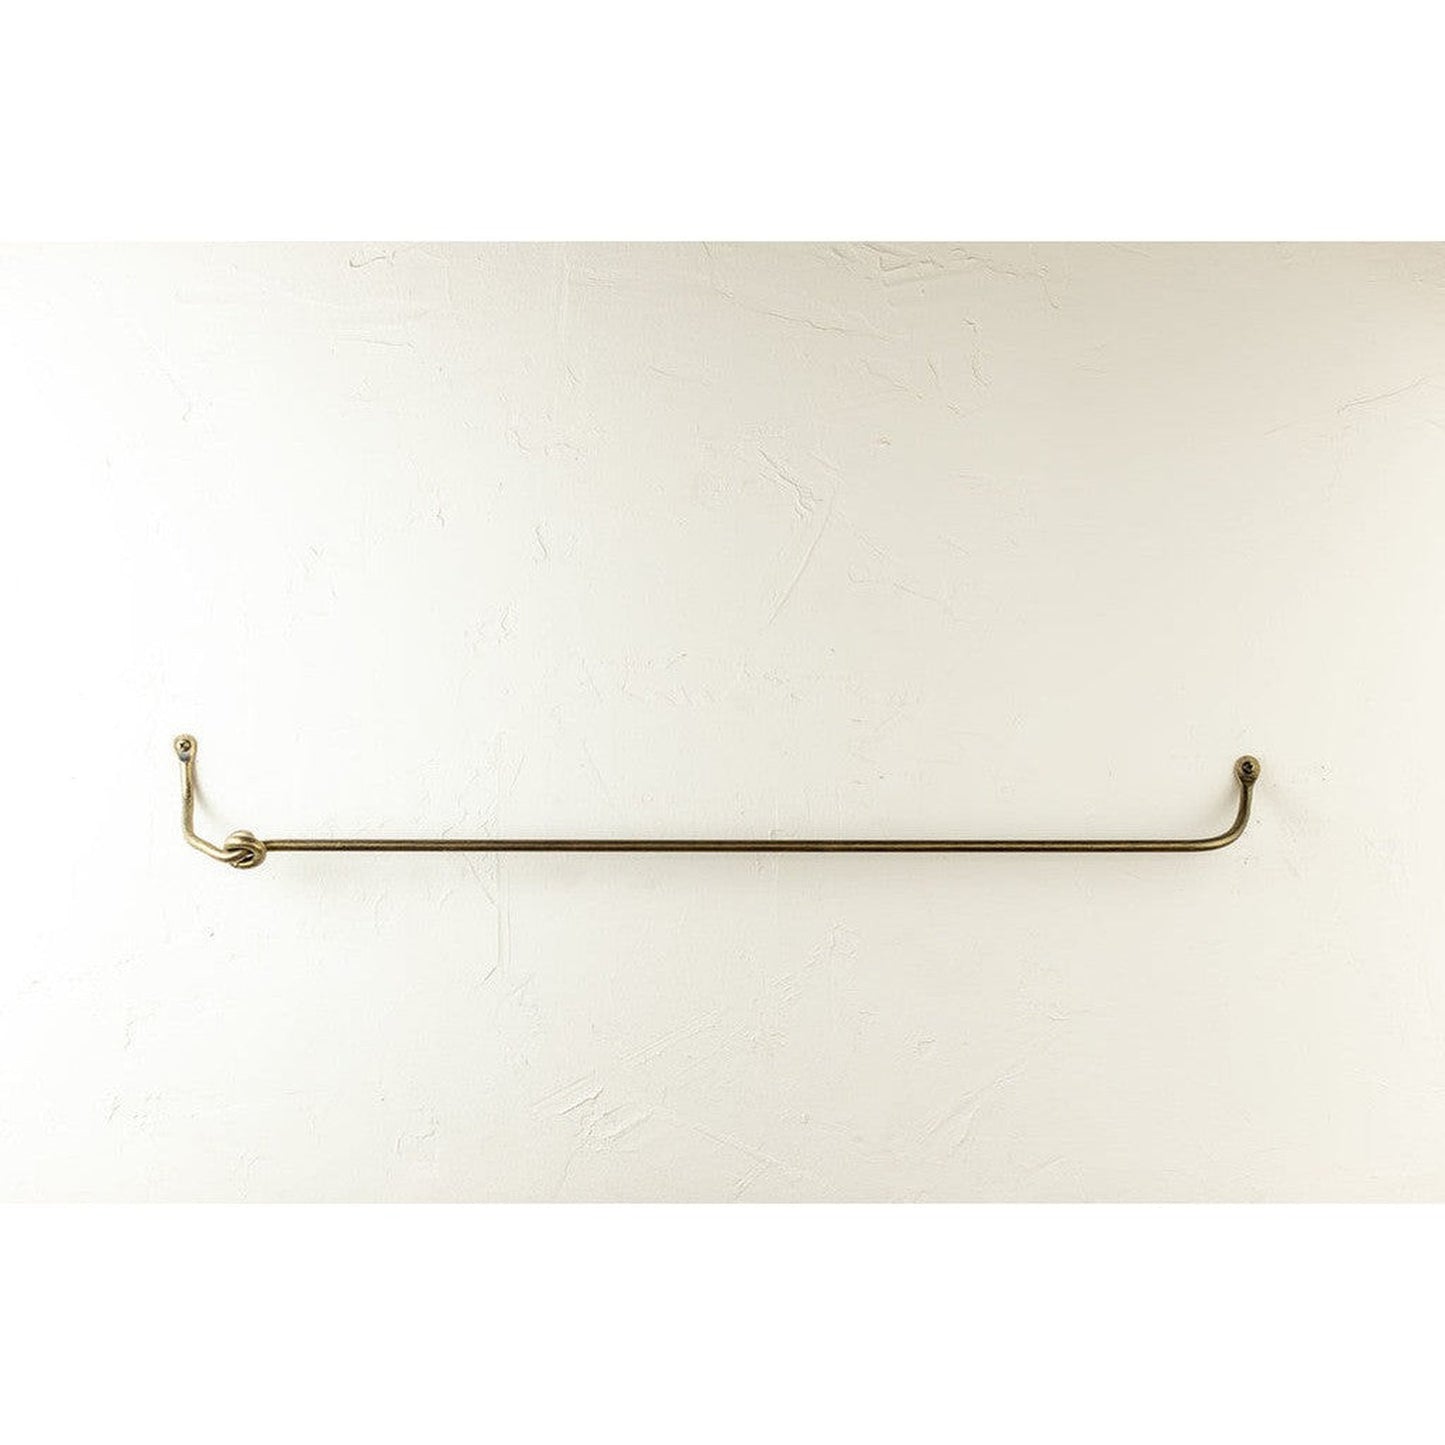 Stone County Ironworks Knot 16" Natural Black Iron Towel Bar With Gold Iron Accent